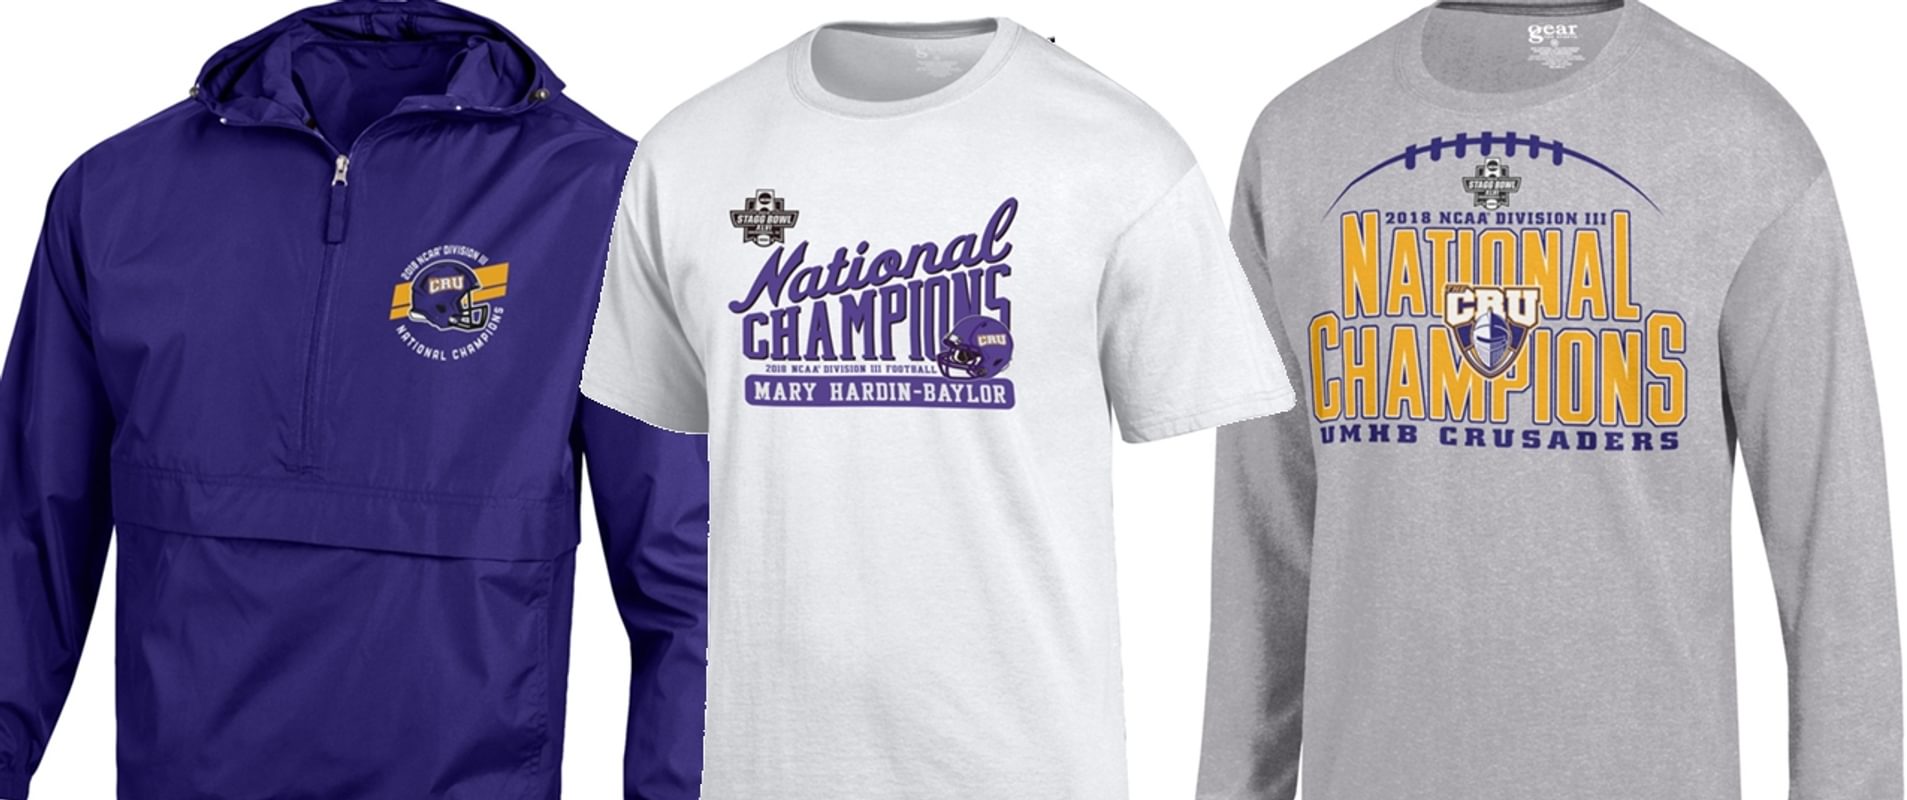 National Championship Merchandise Available Now From Campus Store